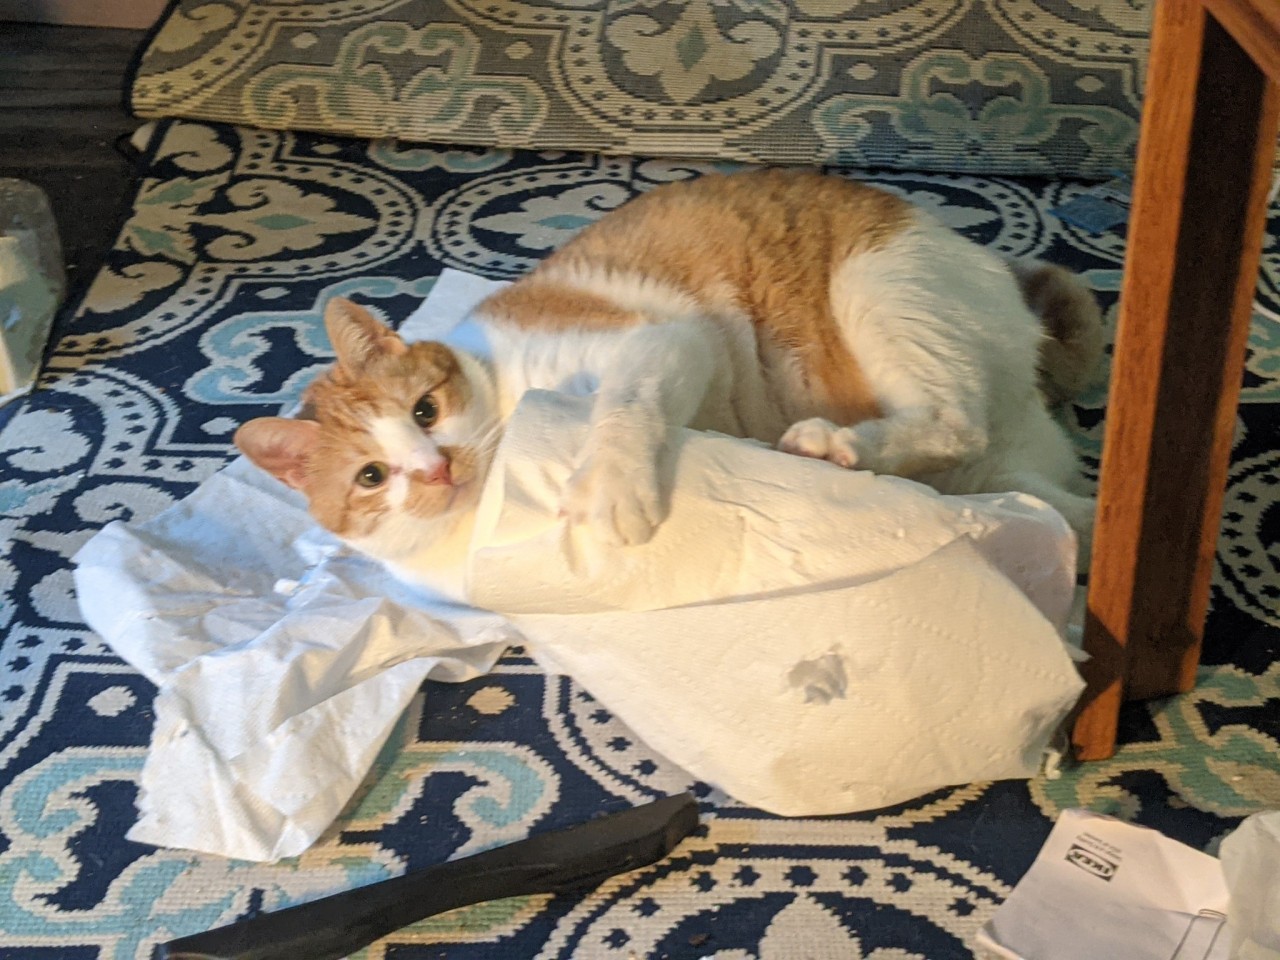 Red and white tabby wrestling with a roll of paper towels